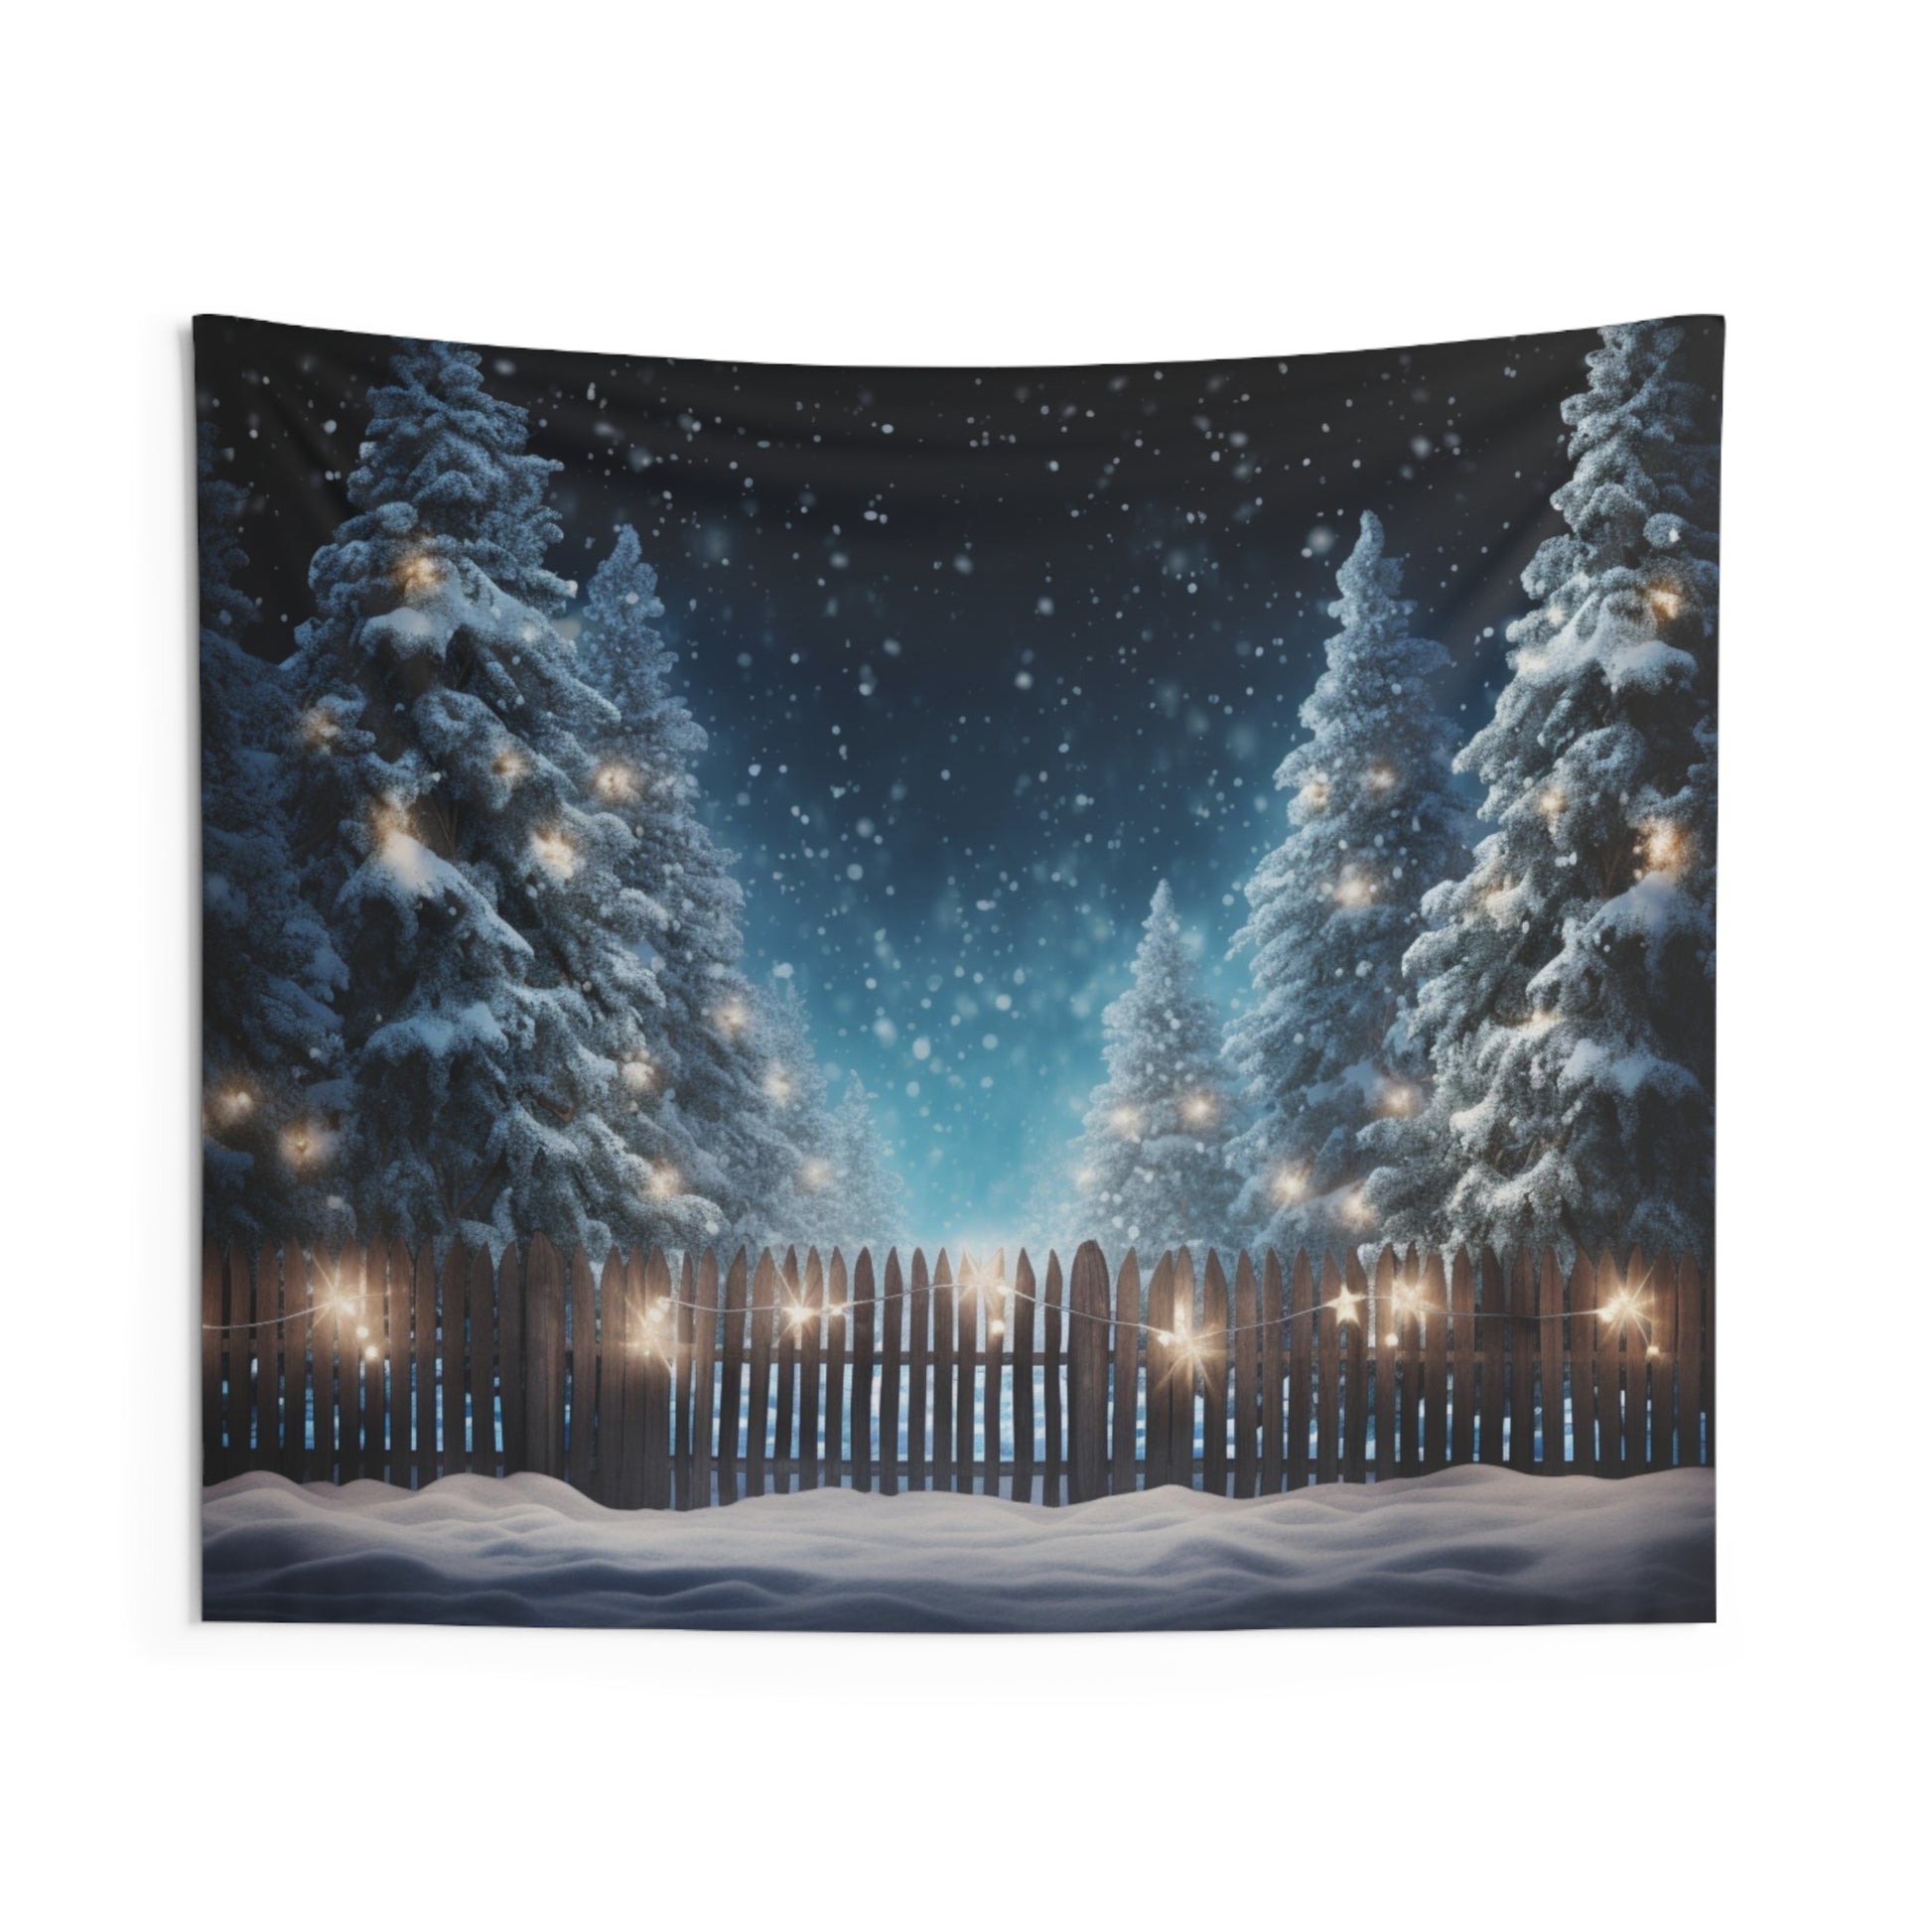 Christmas Trees Tapestry, Snow Lights Xmas Wall Art Hanging Cool Unique Landscape Aesthetic Large Small Decor Bedroom College Room Starcove Fashion